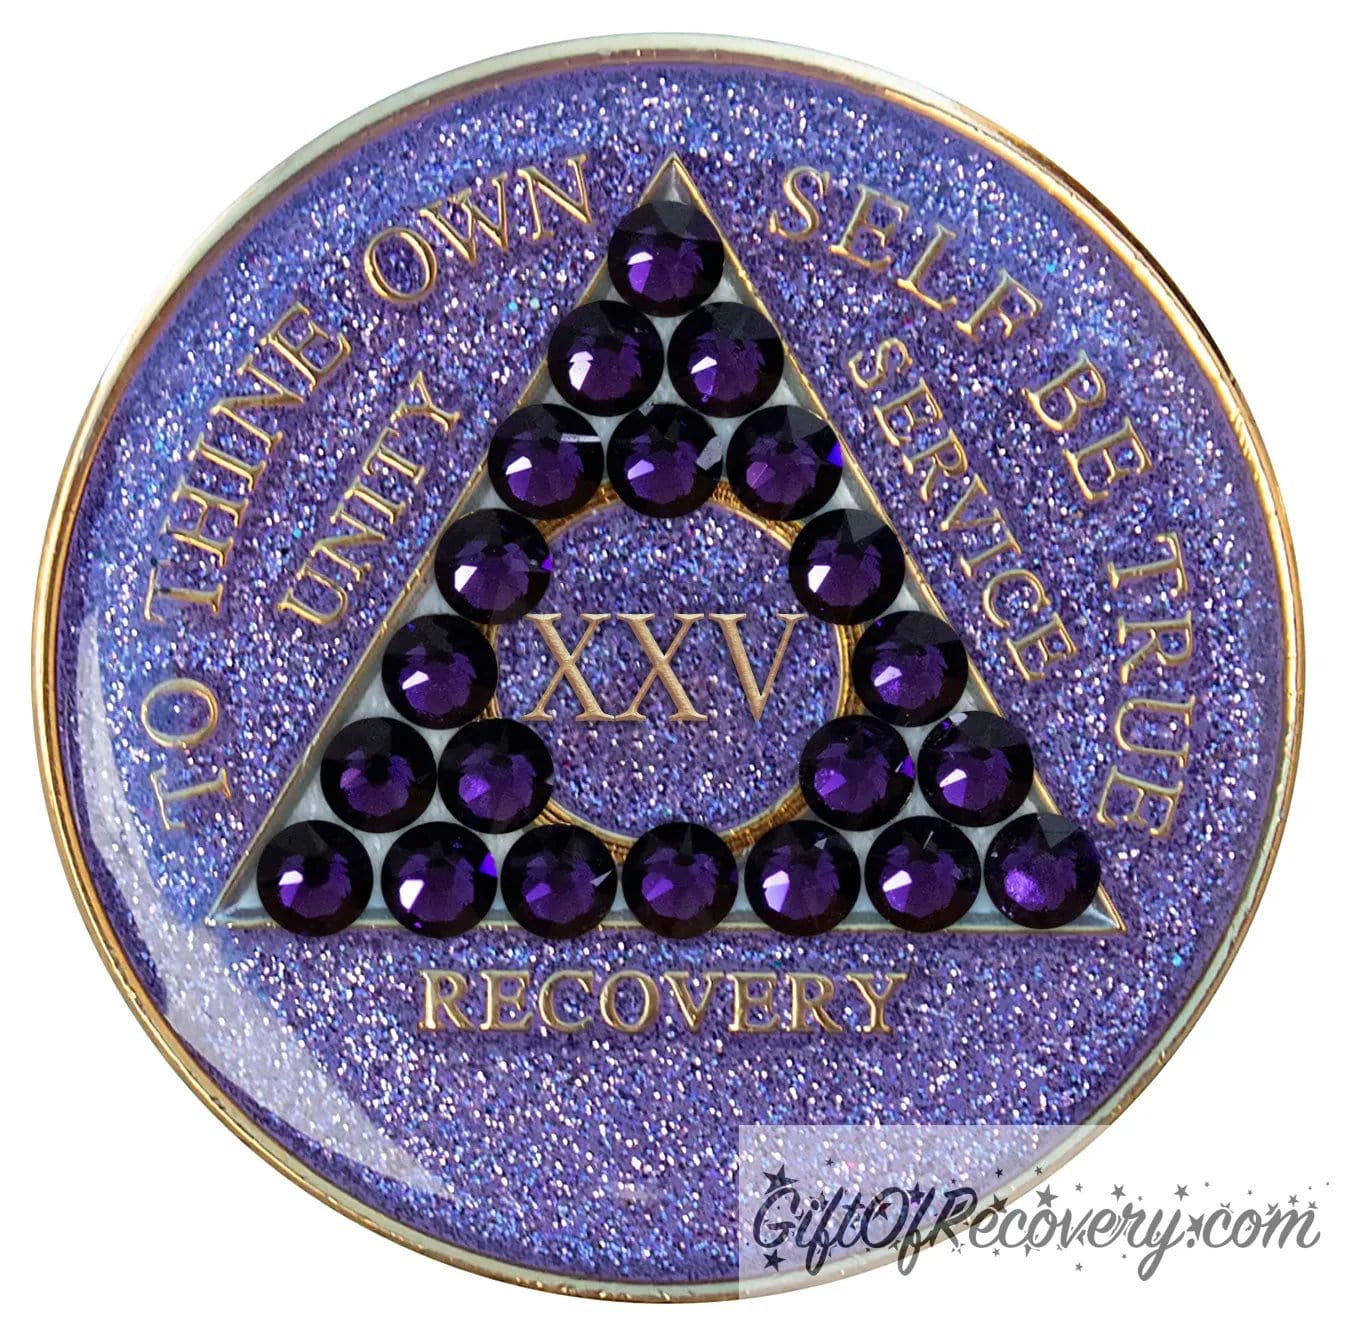 25 year glitter purple AA medallion with 21 purple velvet genuine crystals, that create the triangle in middle, and to thine own self be true, unity, service, recovery, the roman numeral in the center of the circle triangle, along with the rim of the recovery medallion, are embossed in 14 gold plated brass, sealed in resin for glossy finish.